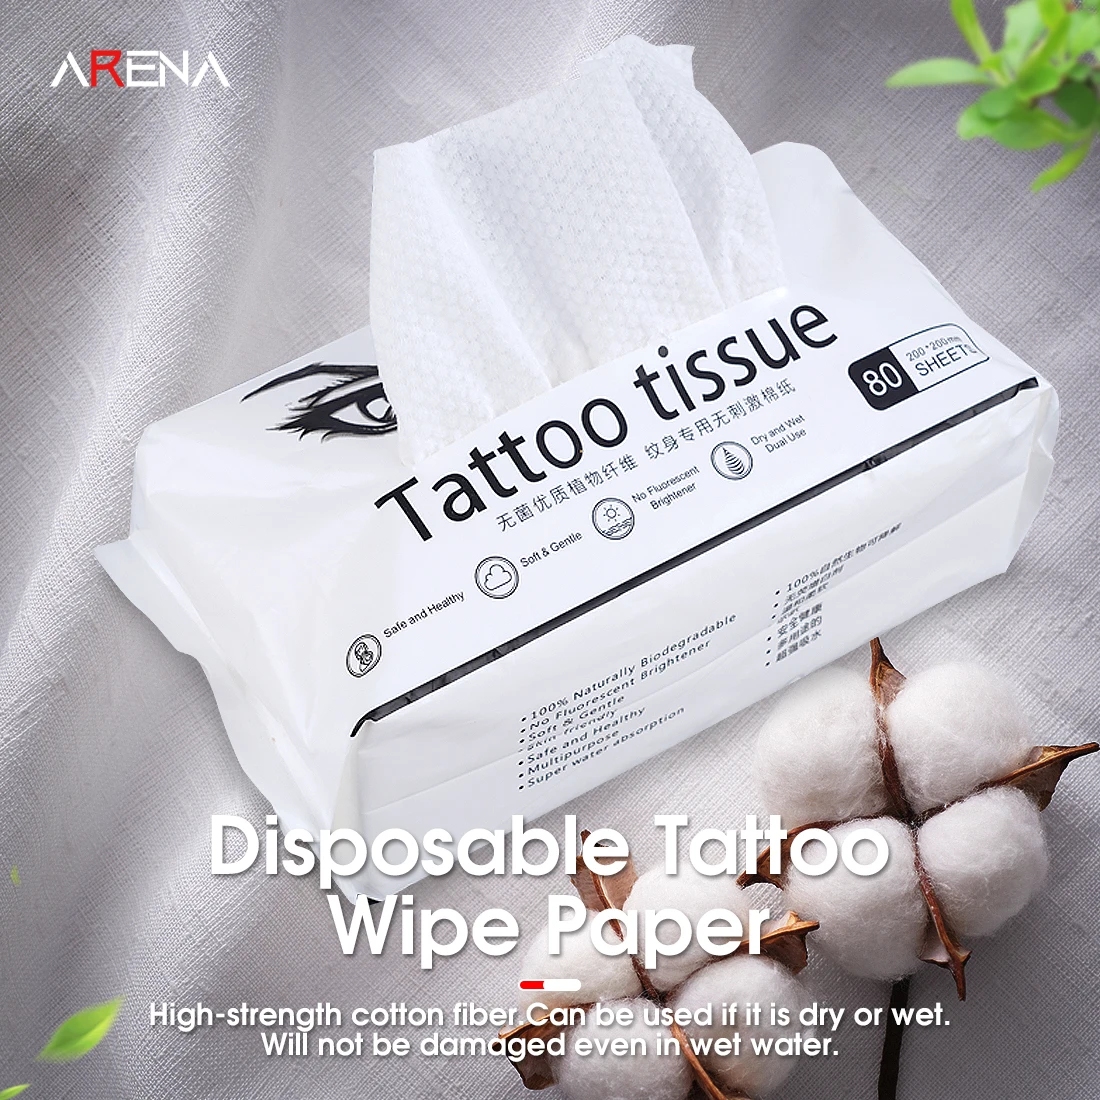 nano dishwasher sponge wipe cleaning cloth household kitchen cleaning double sided sponge block dishwasher 80pcs Arenahawk White Disposable Tattoo Wipe Paper Soft Tissue Skin Cloth Towel Body Art Cleaning Makeup Tattoo Supplies